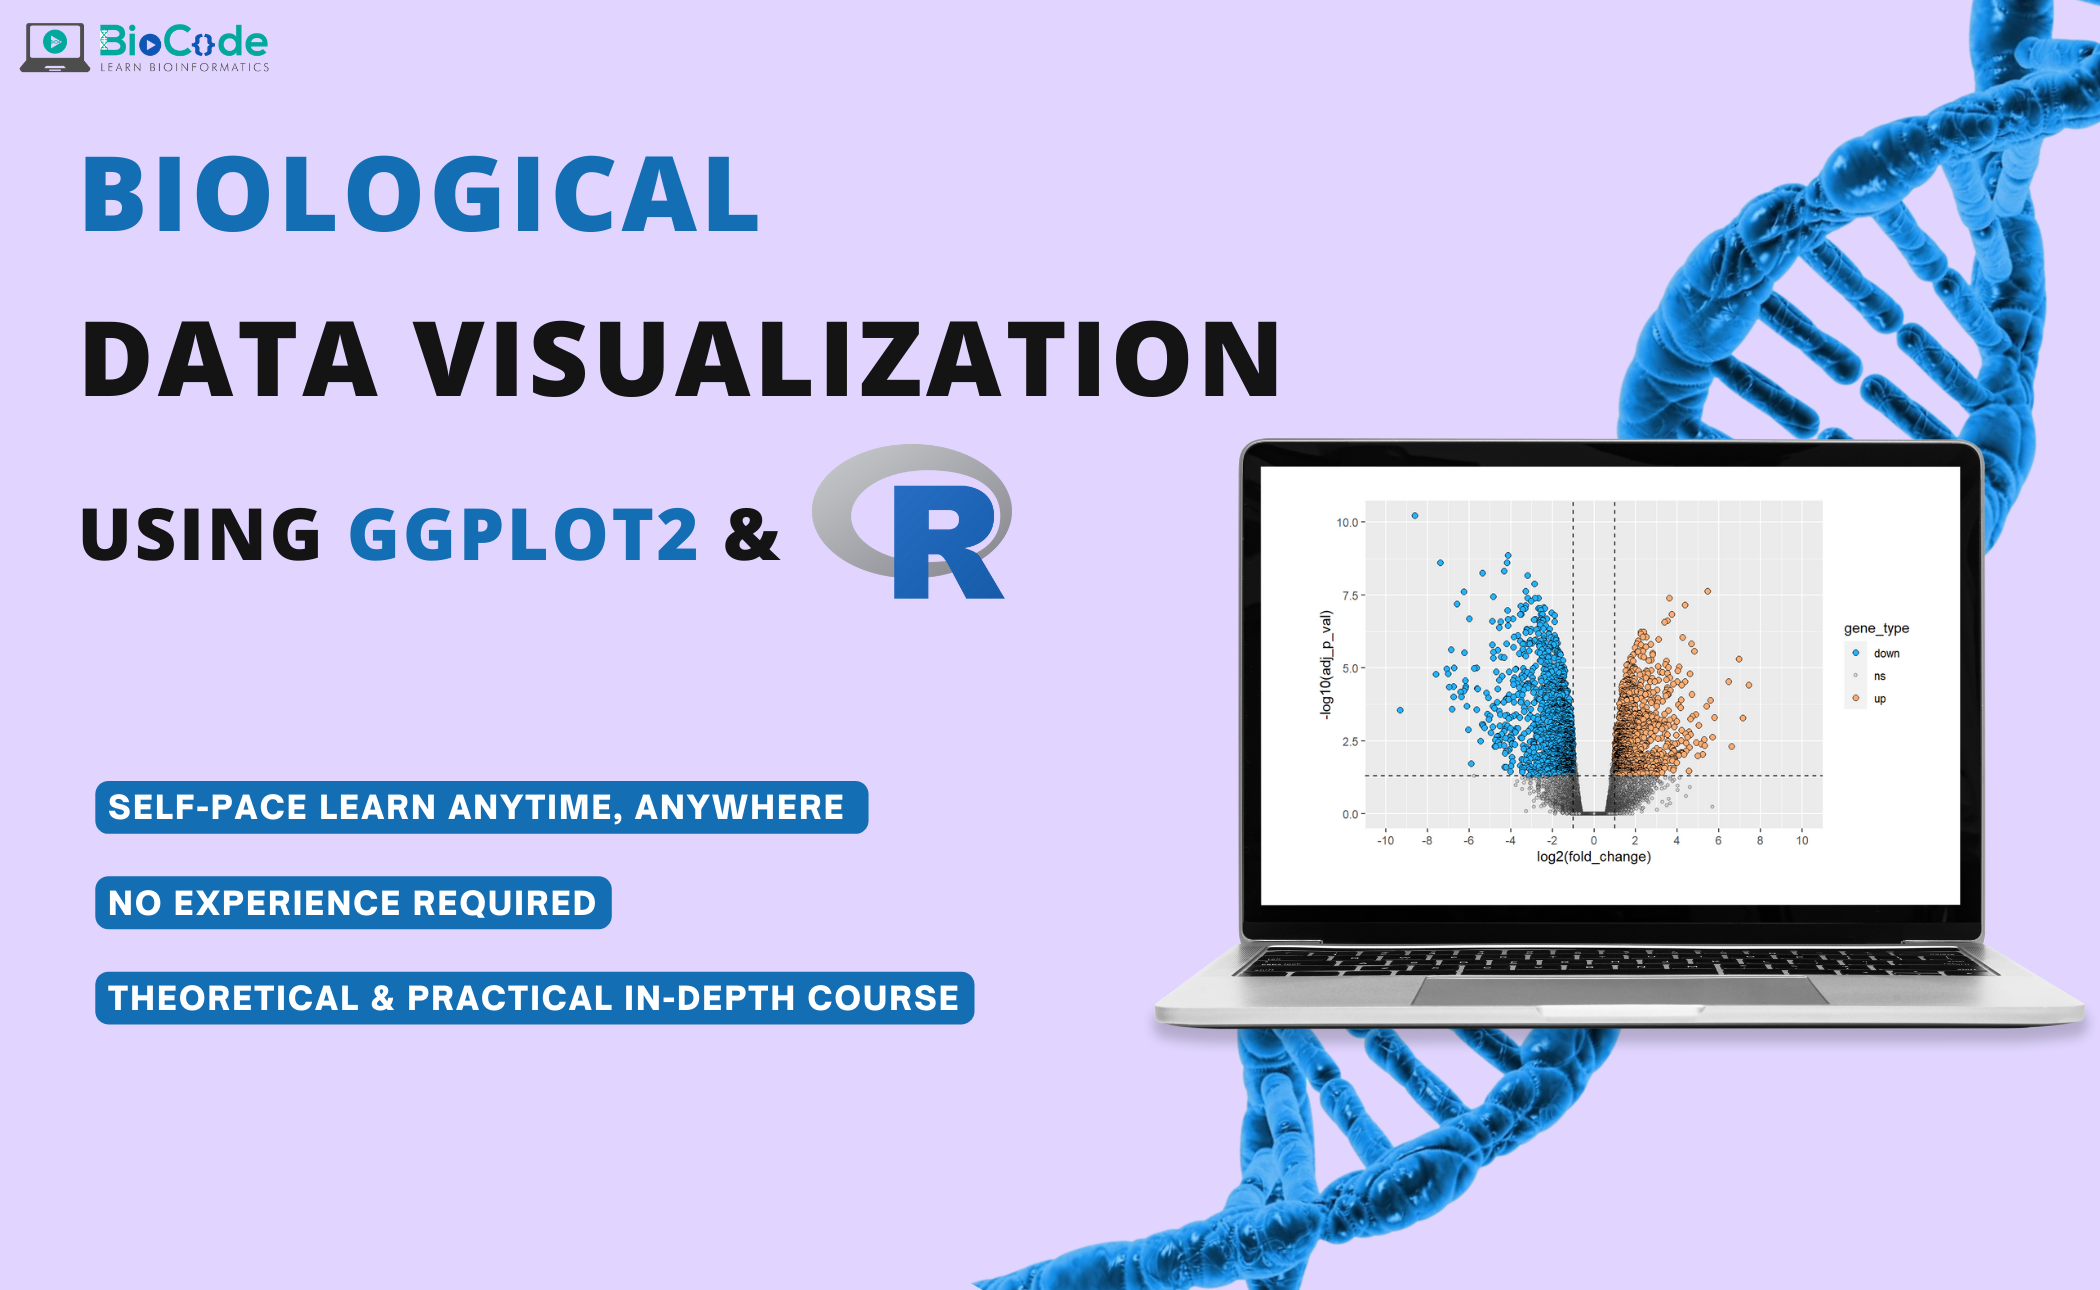 Hands-on Biological Data Visualization with ggplot2 & R